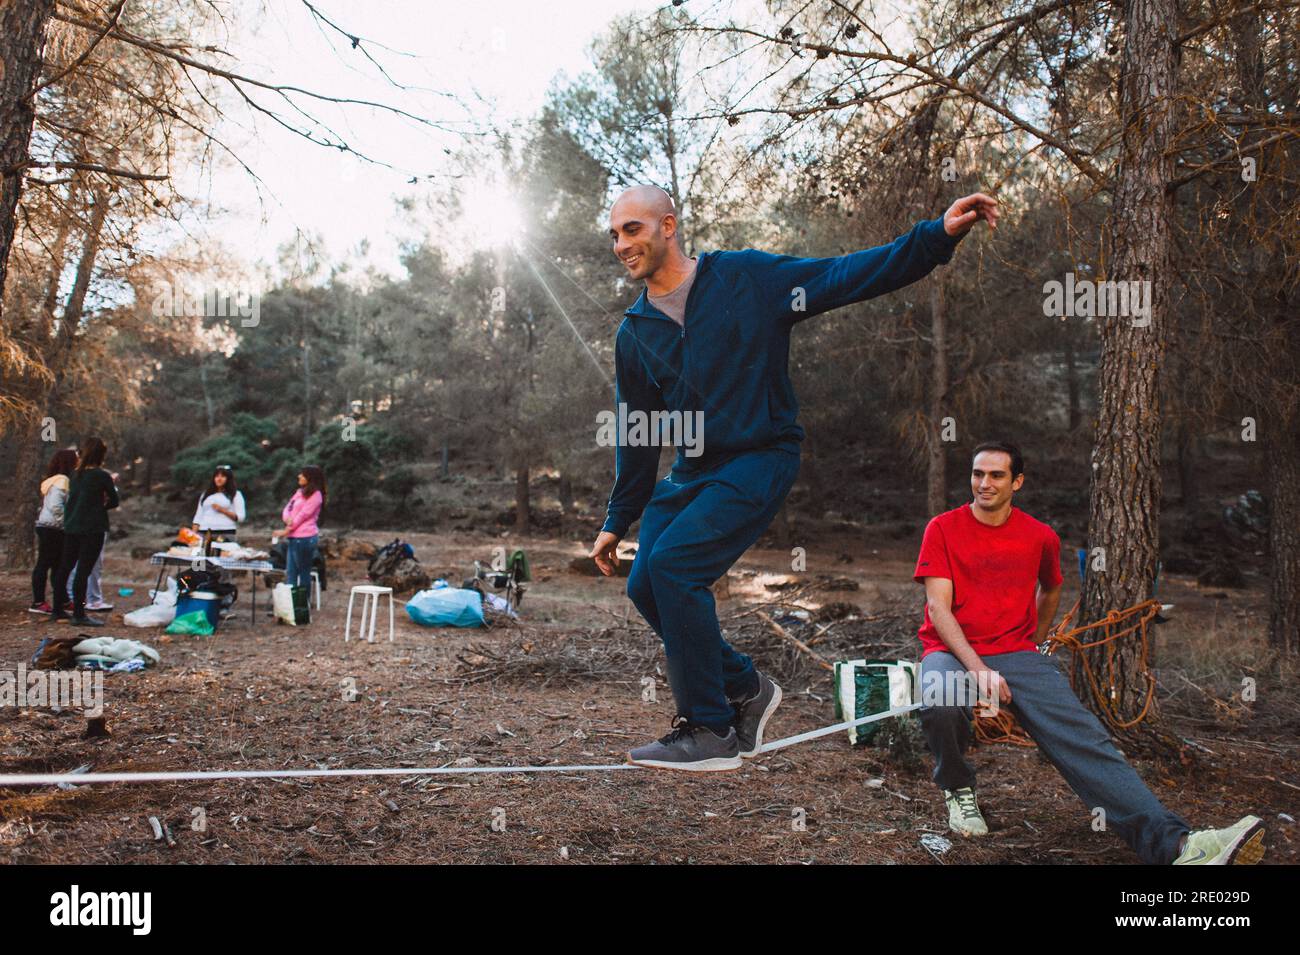 Man slacklining in pine tree forest in southern spain with friends Stock Photo